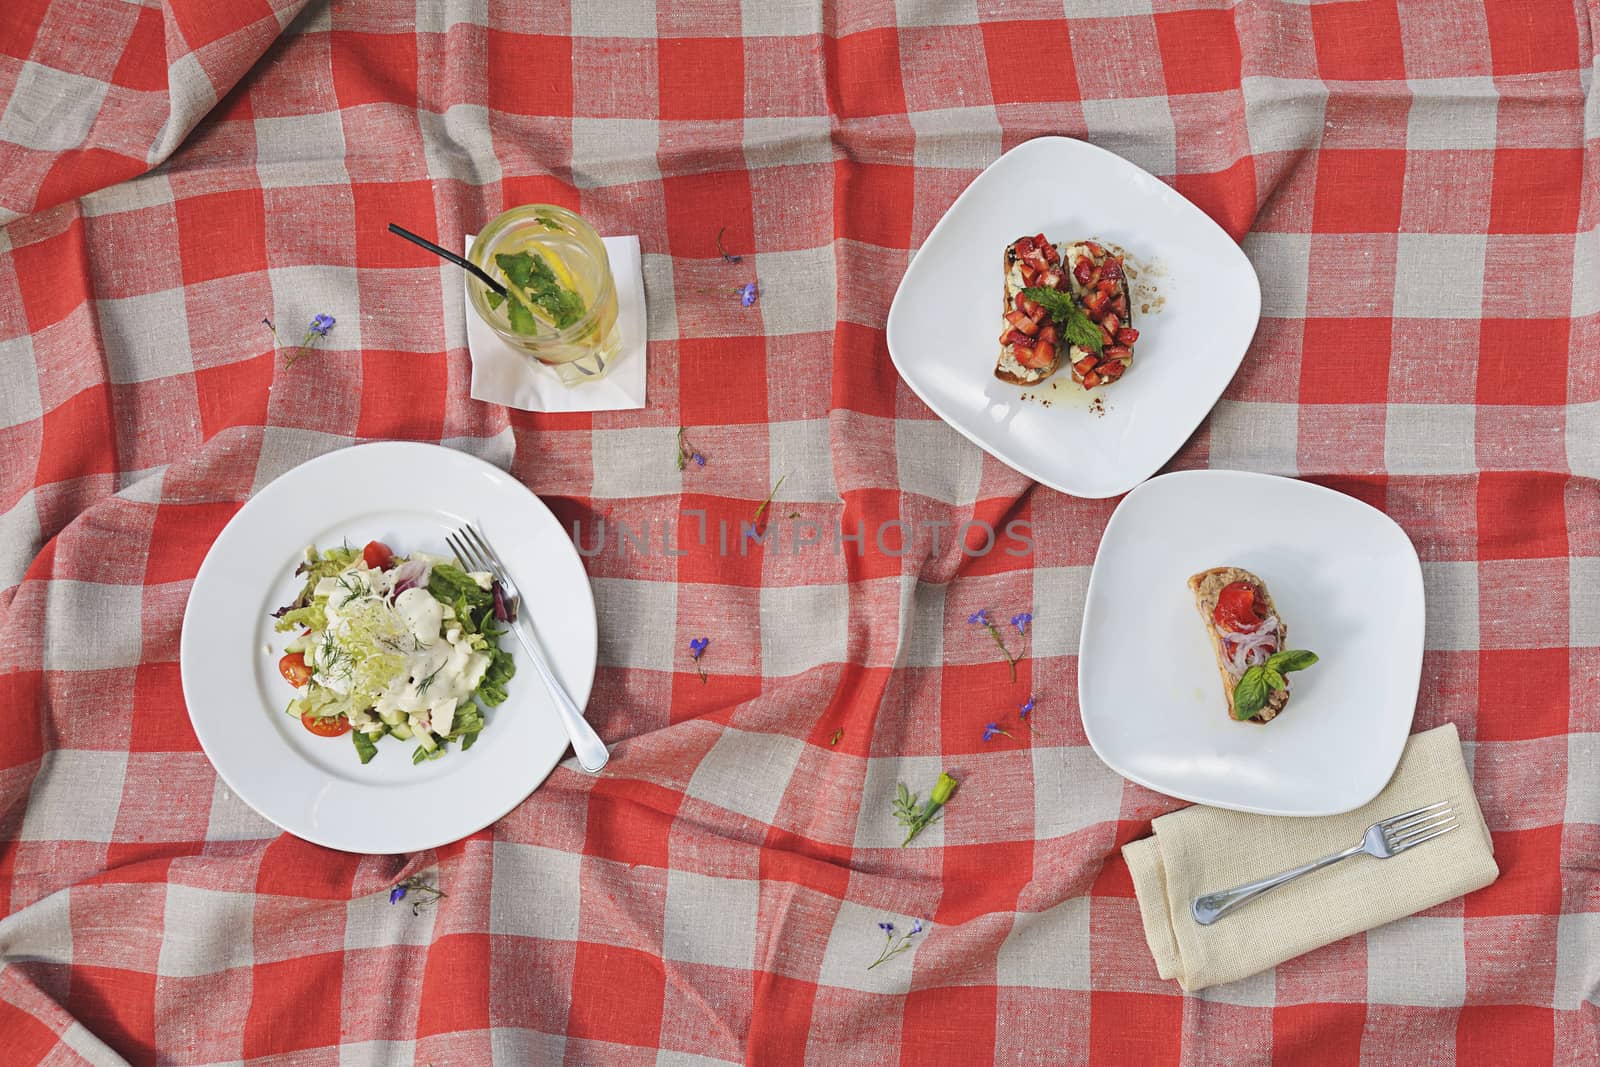 Picnic with Sandwiches and salad on red squares material